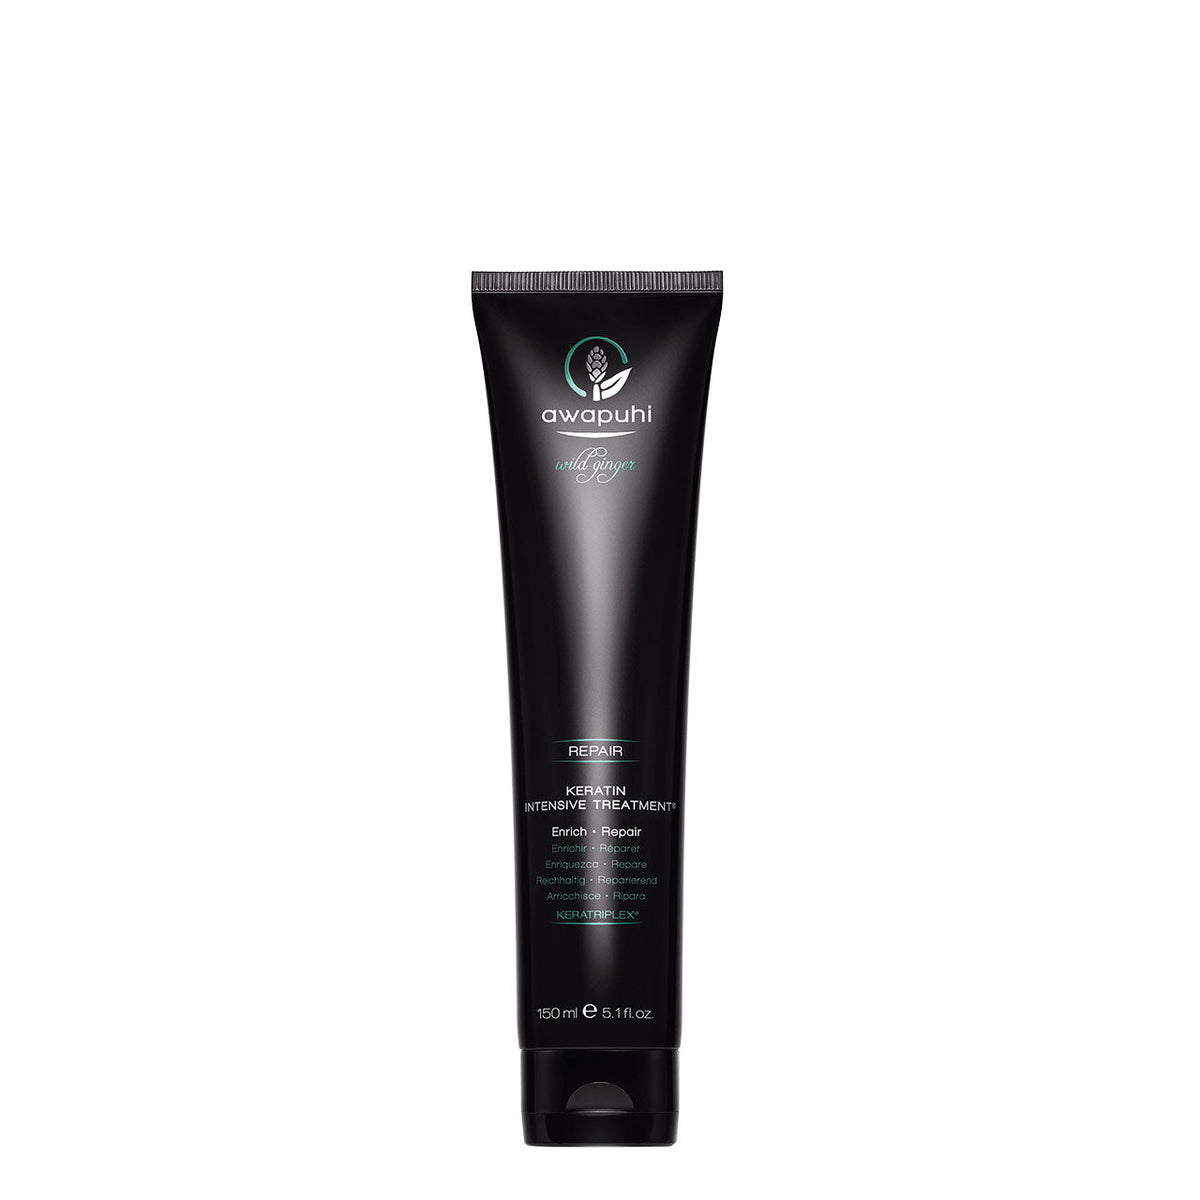 Awapuhi Wild Ginger Repair Keratin Intensive Treatment - 150ML - by Paul Mitchell |ProCare Outlet|